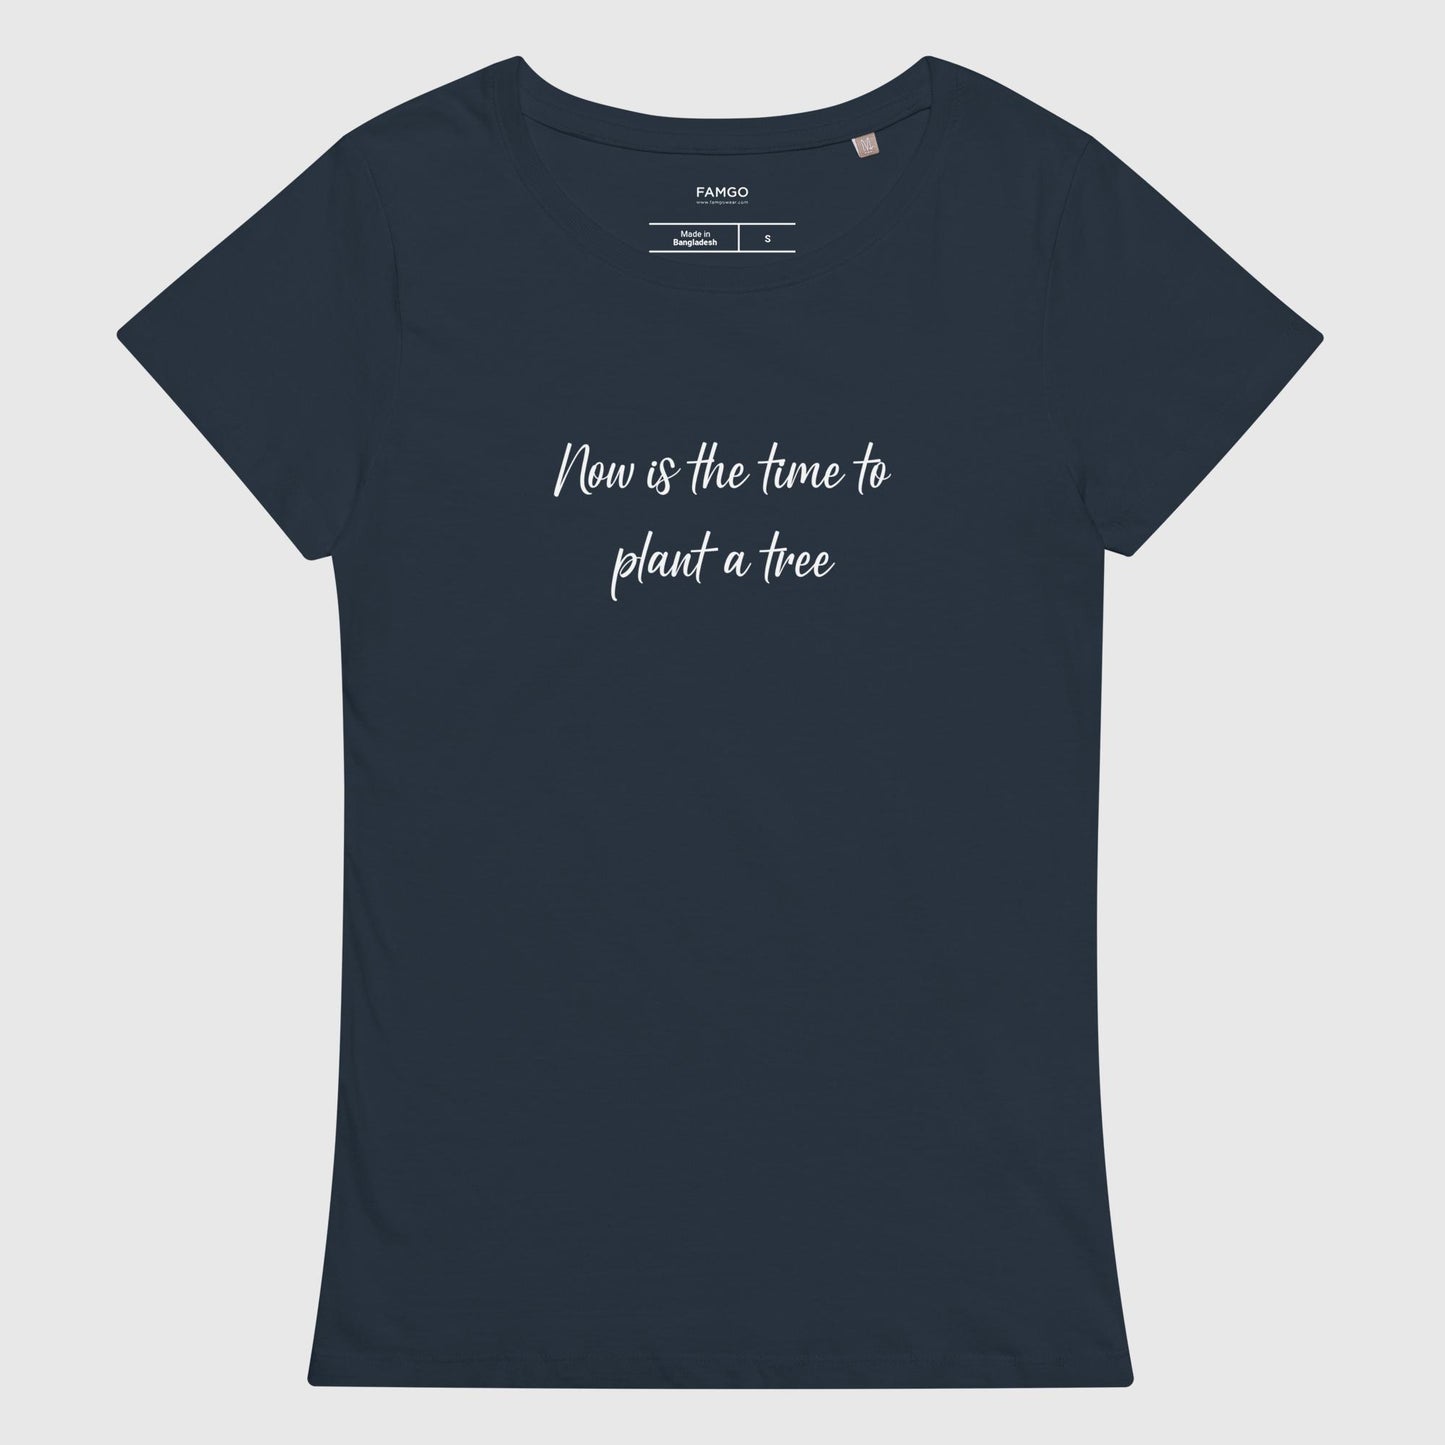 Women's french navy organic cotton t-shirt that features, "Now is the time to plant a tree,' inspired by the Chinese proverb, "The best time to plant a tree was 20 years ago. The second best time is now."